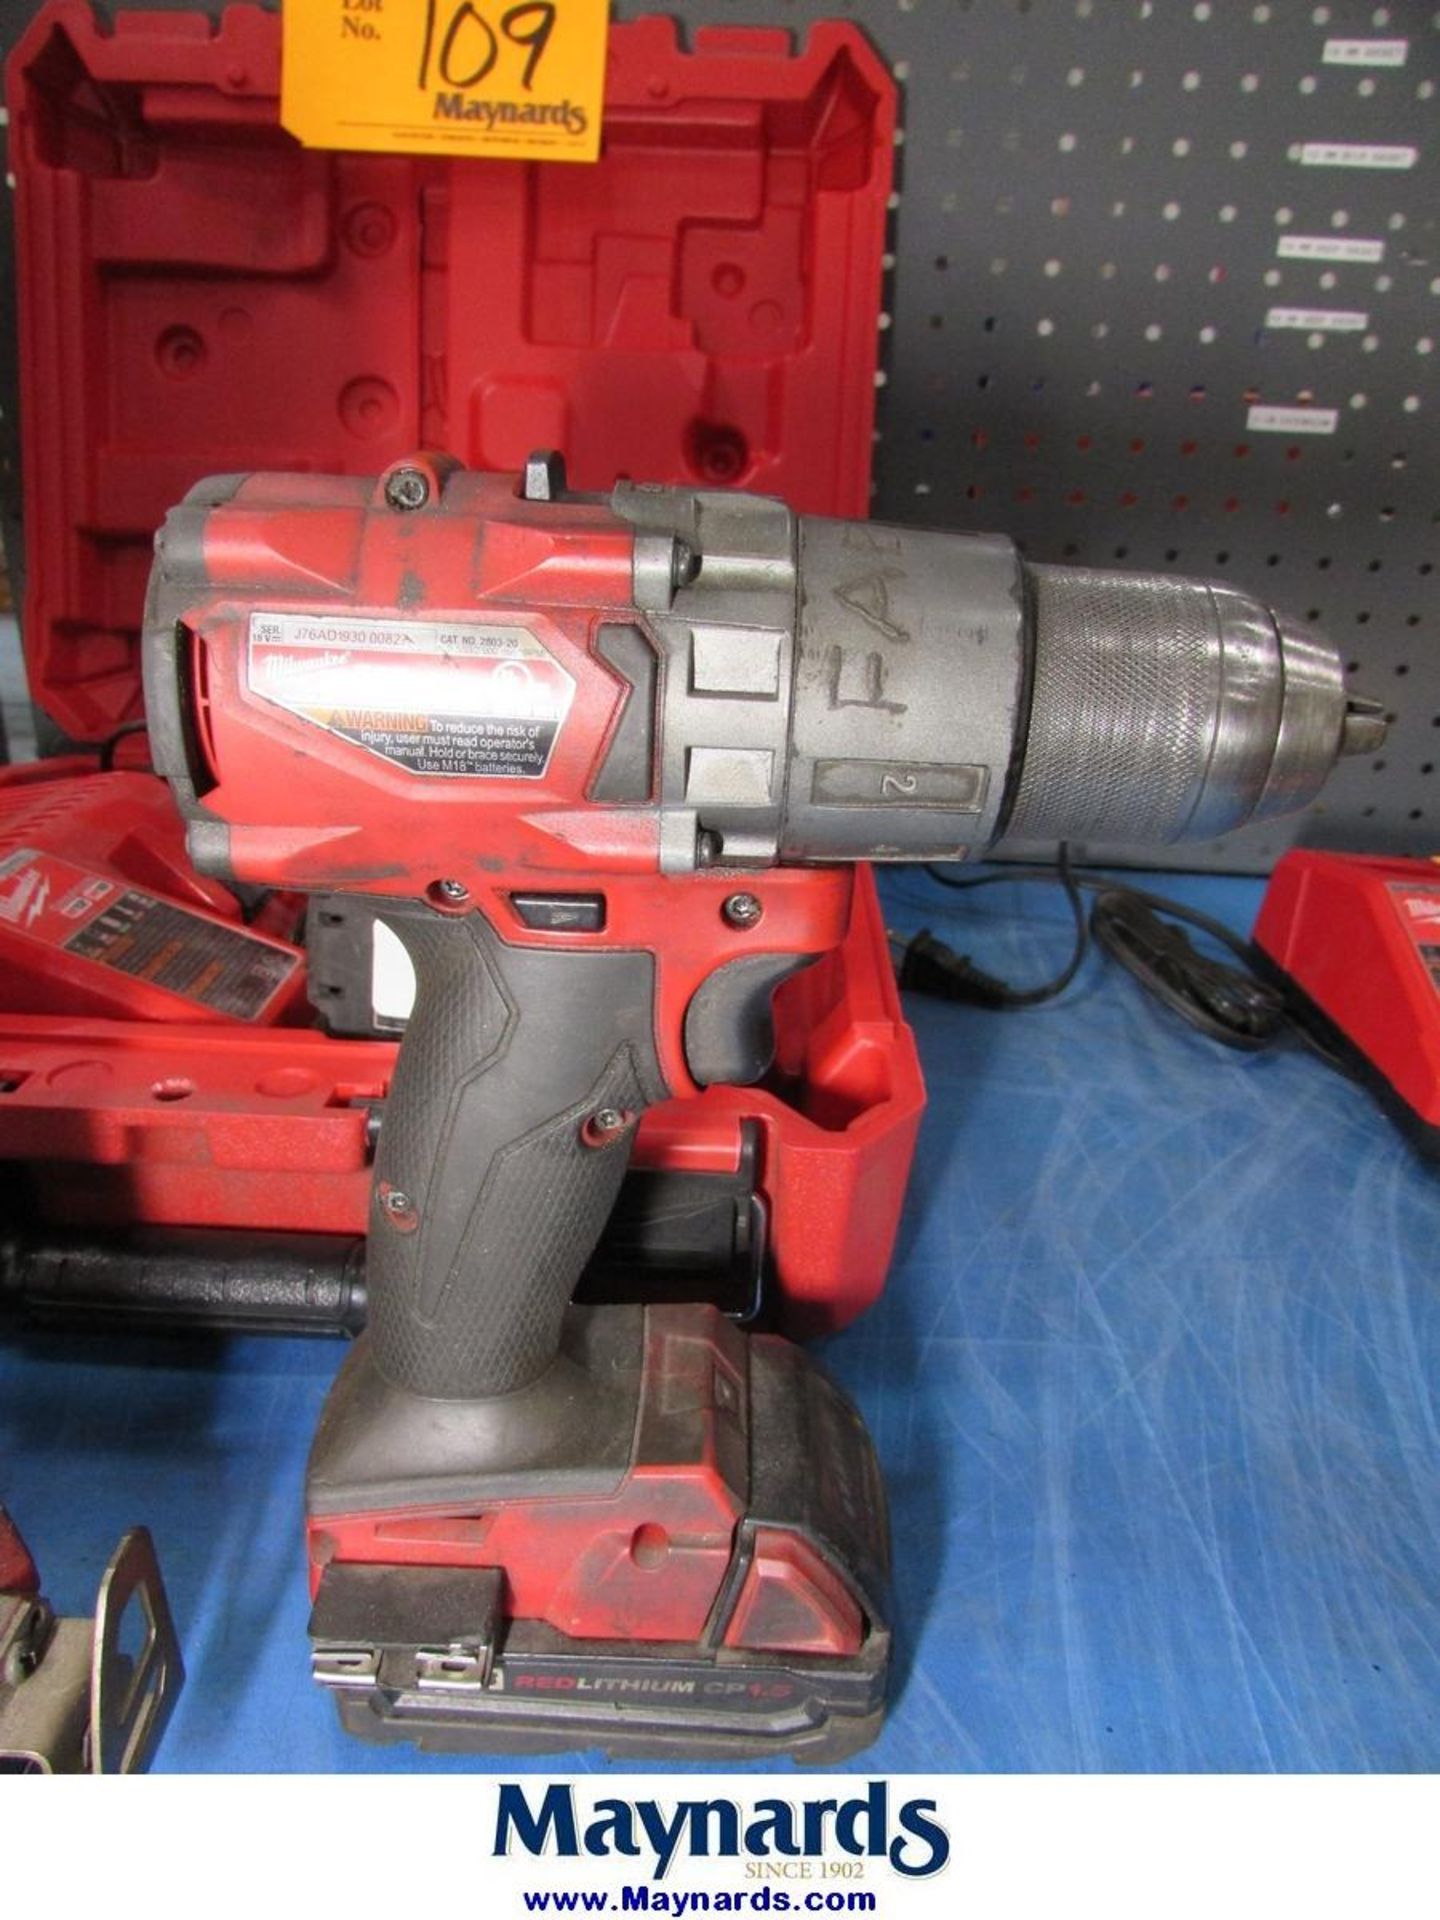 Milwaukee (4) 1/2" Cordless Electric Drill/Drivers - Image 5 of 5